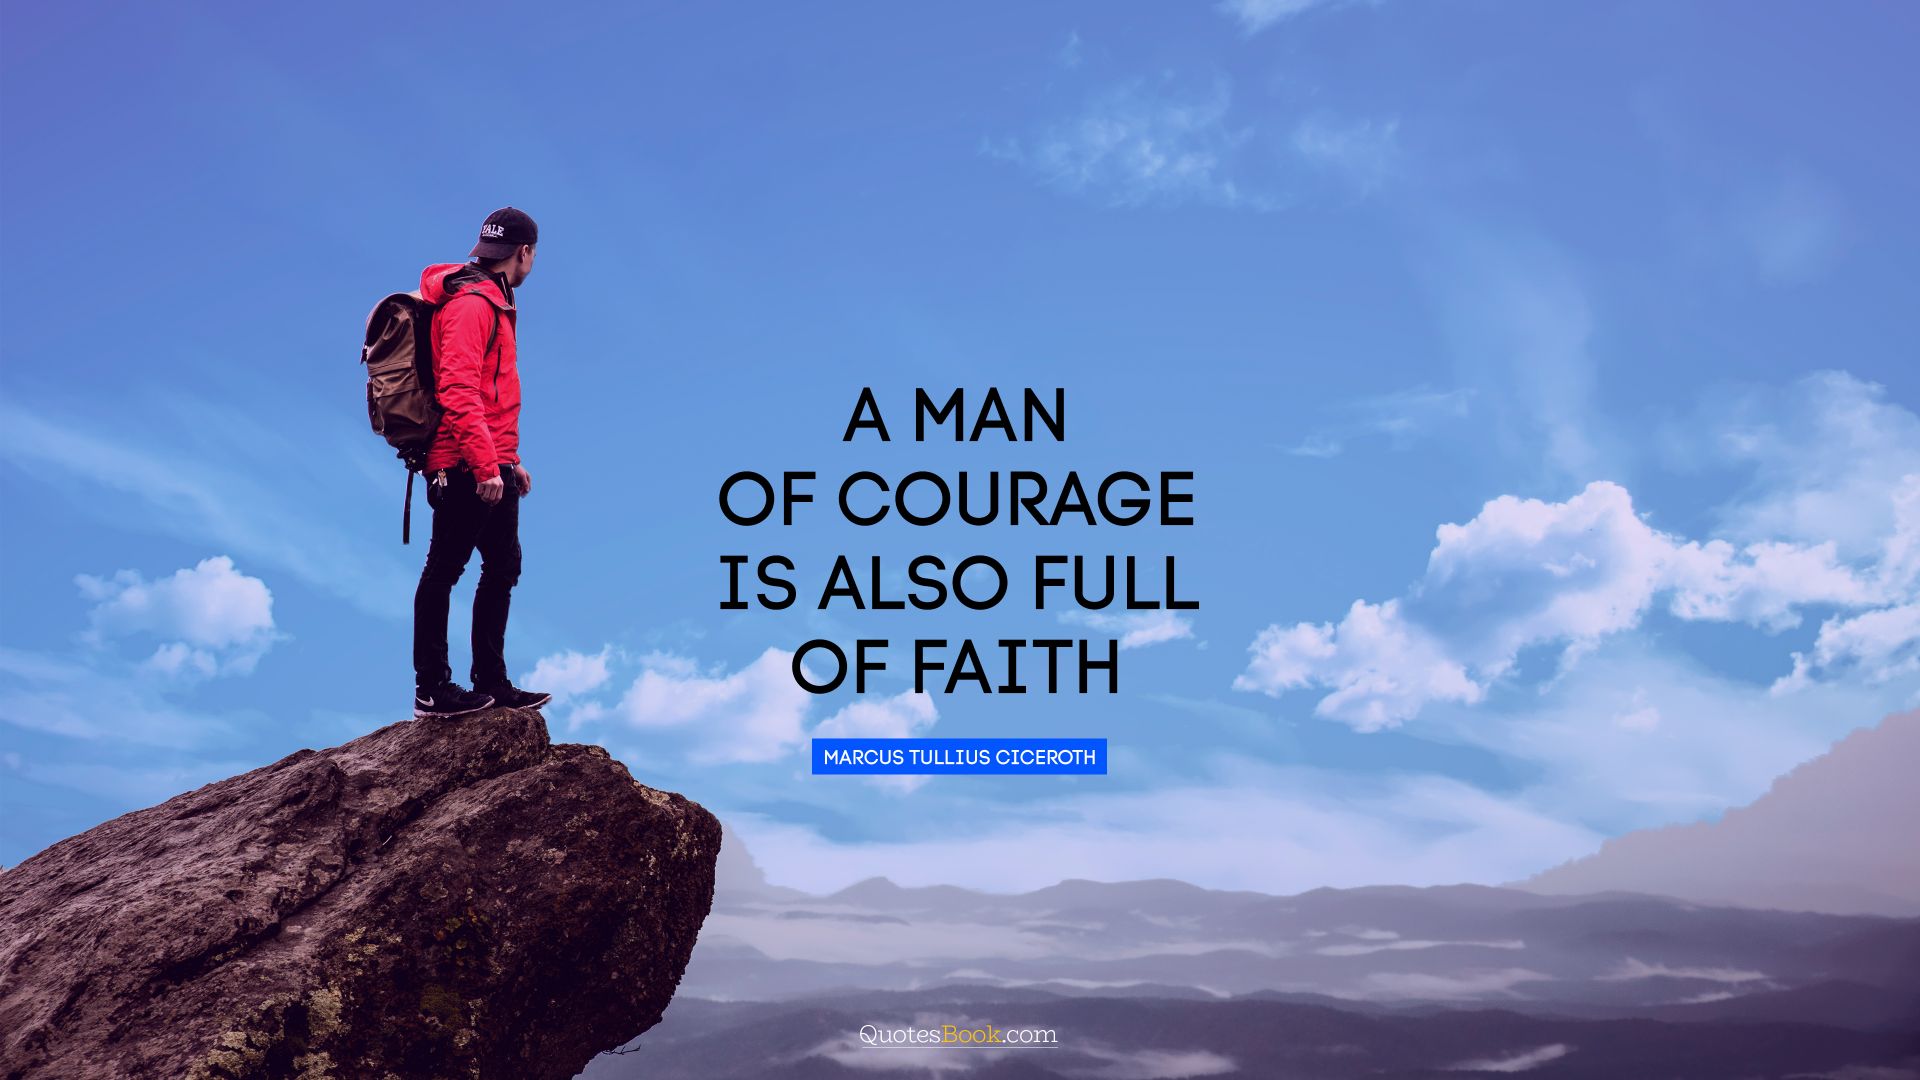 A man of courage is also full of faith. - Quote by Marcus Tullius Cicero